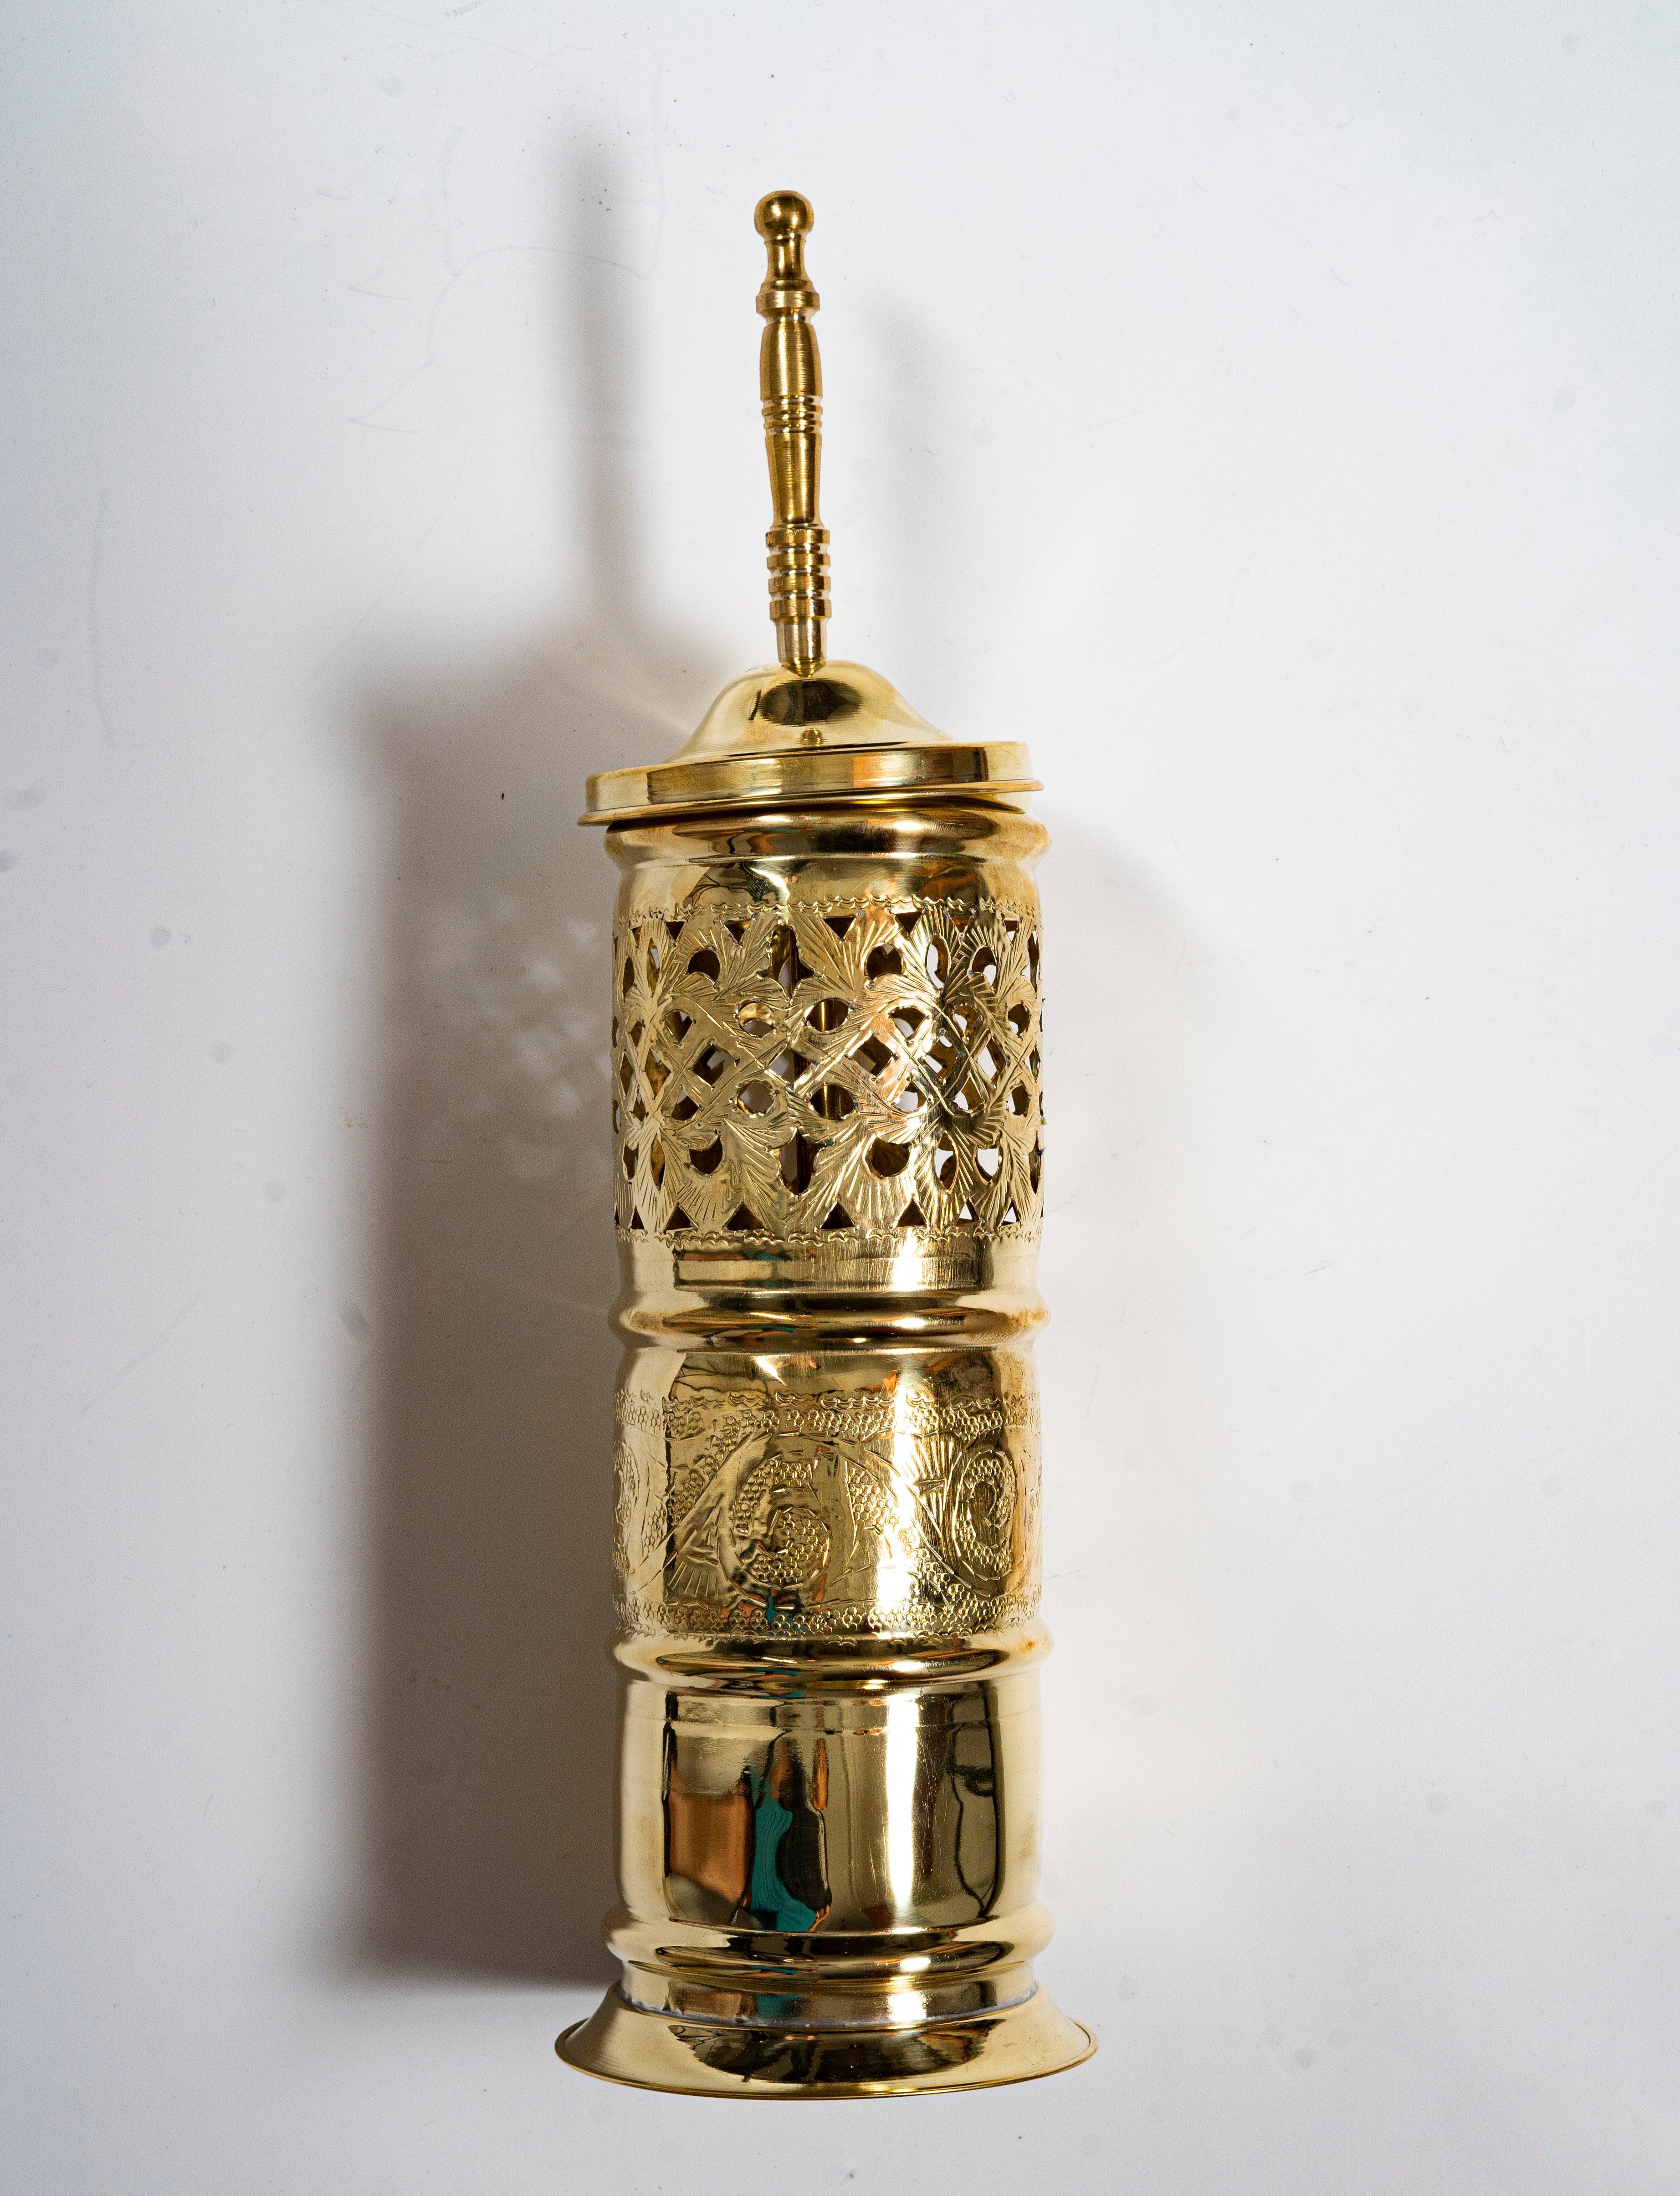 Antique Unlacquered Brass Toilet Brush - Zayian